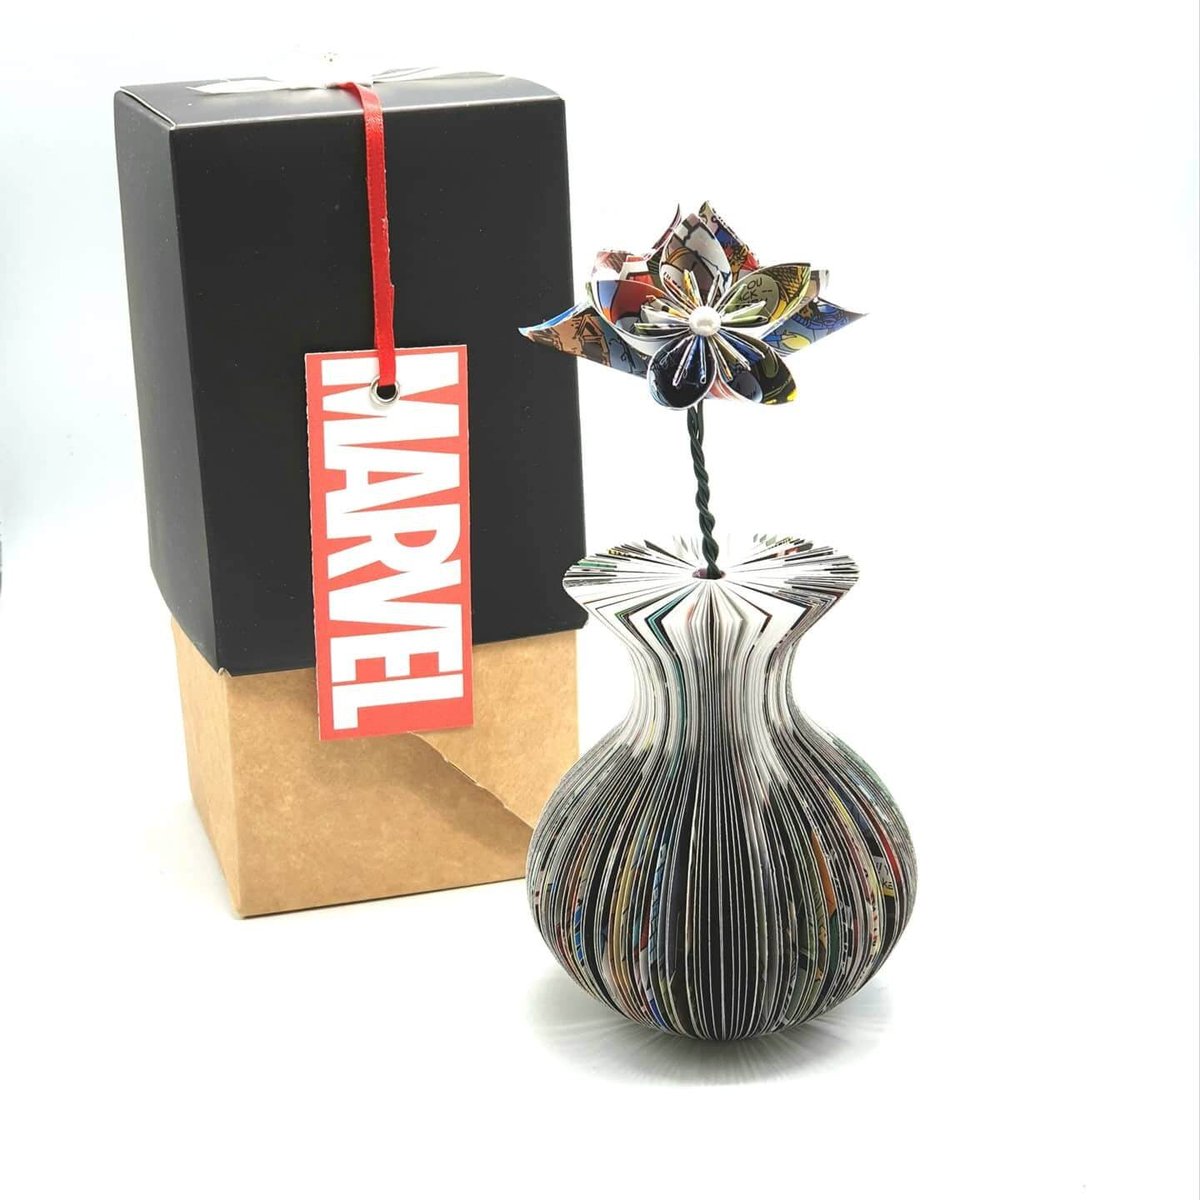 Mini Superhero Vase and Flowers Book Gift creatoncrafts.com/products/super… #Shopify #mhhsbd #CreatonCrafts #HandmadePaper